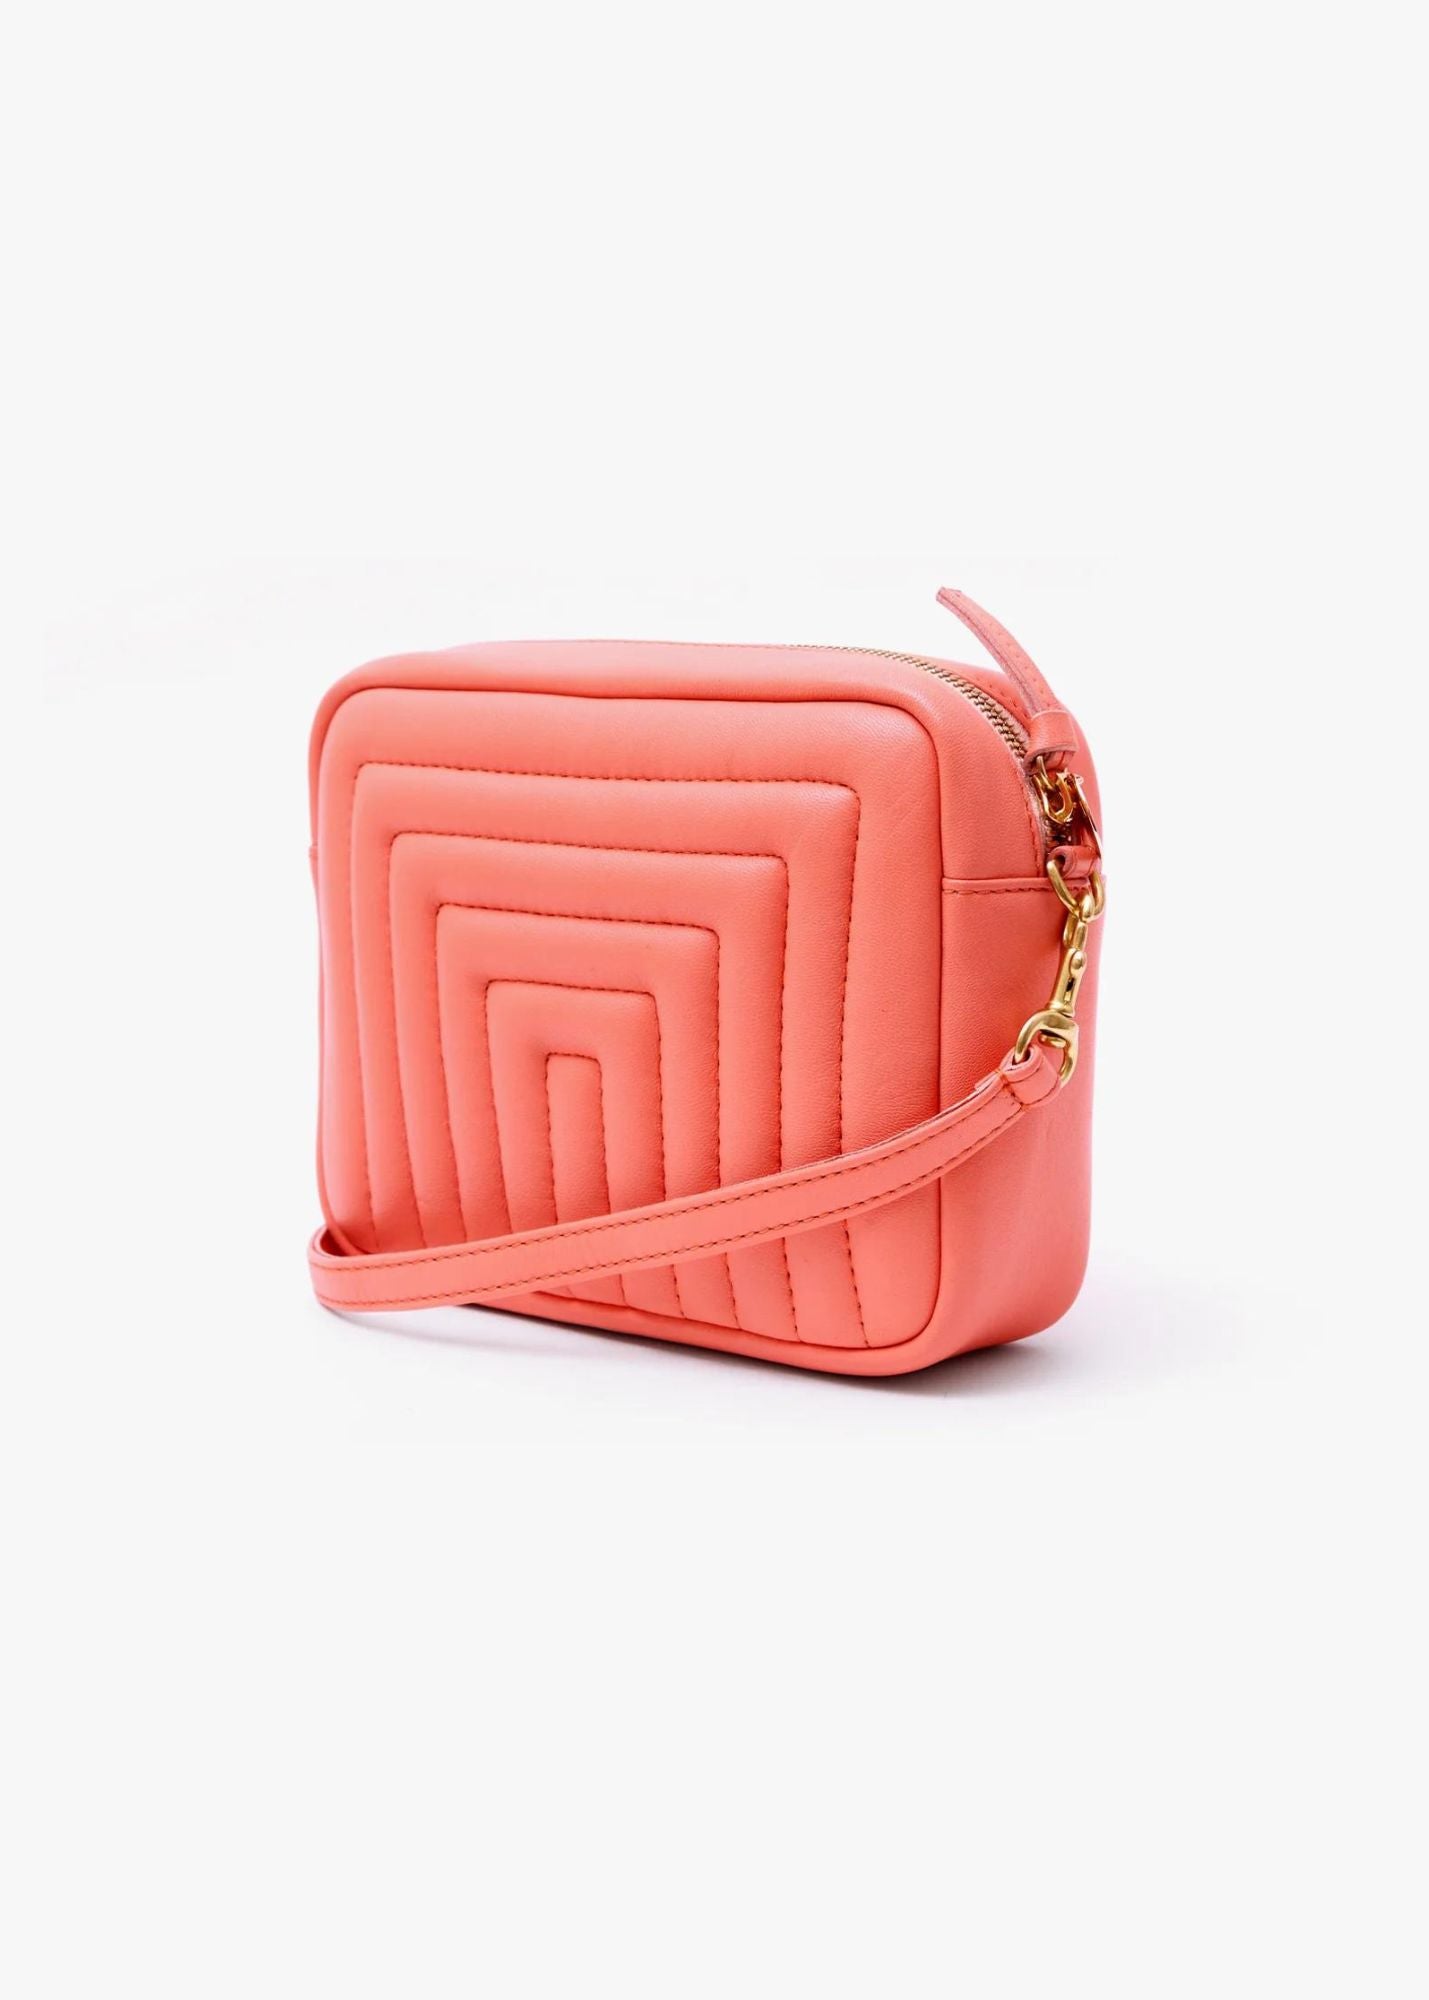 CLARE V. CHANNEL QUILTED MIDI SAC